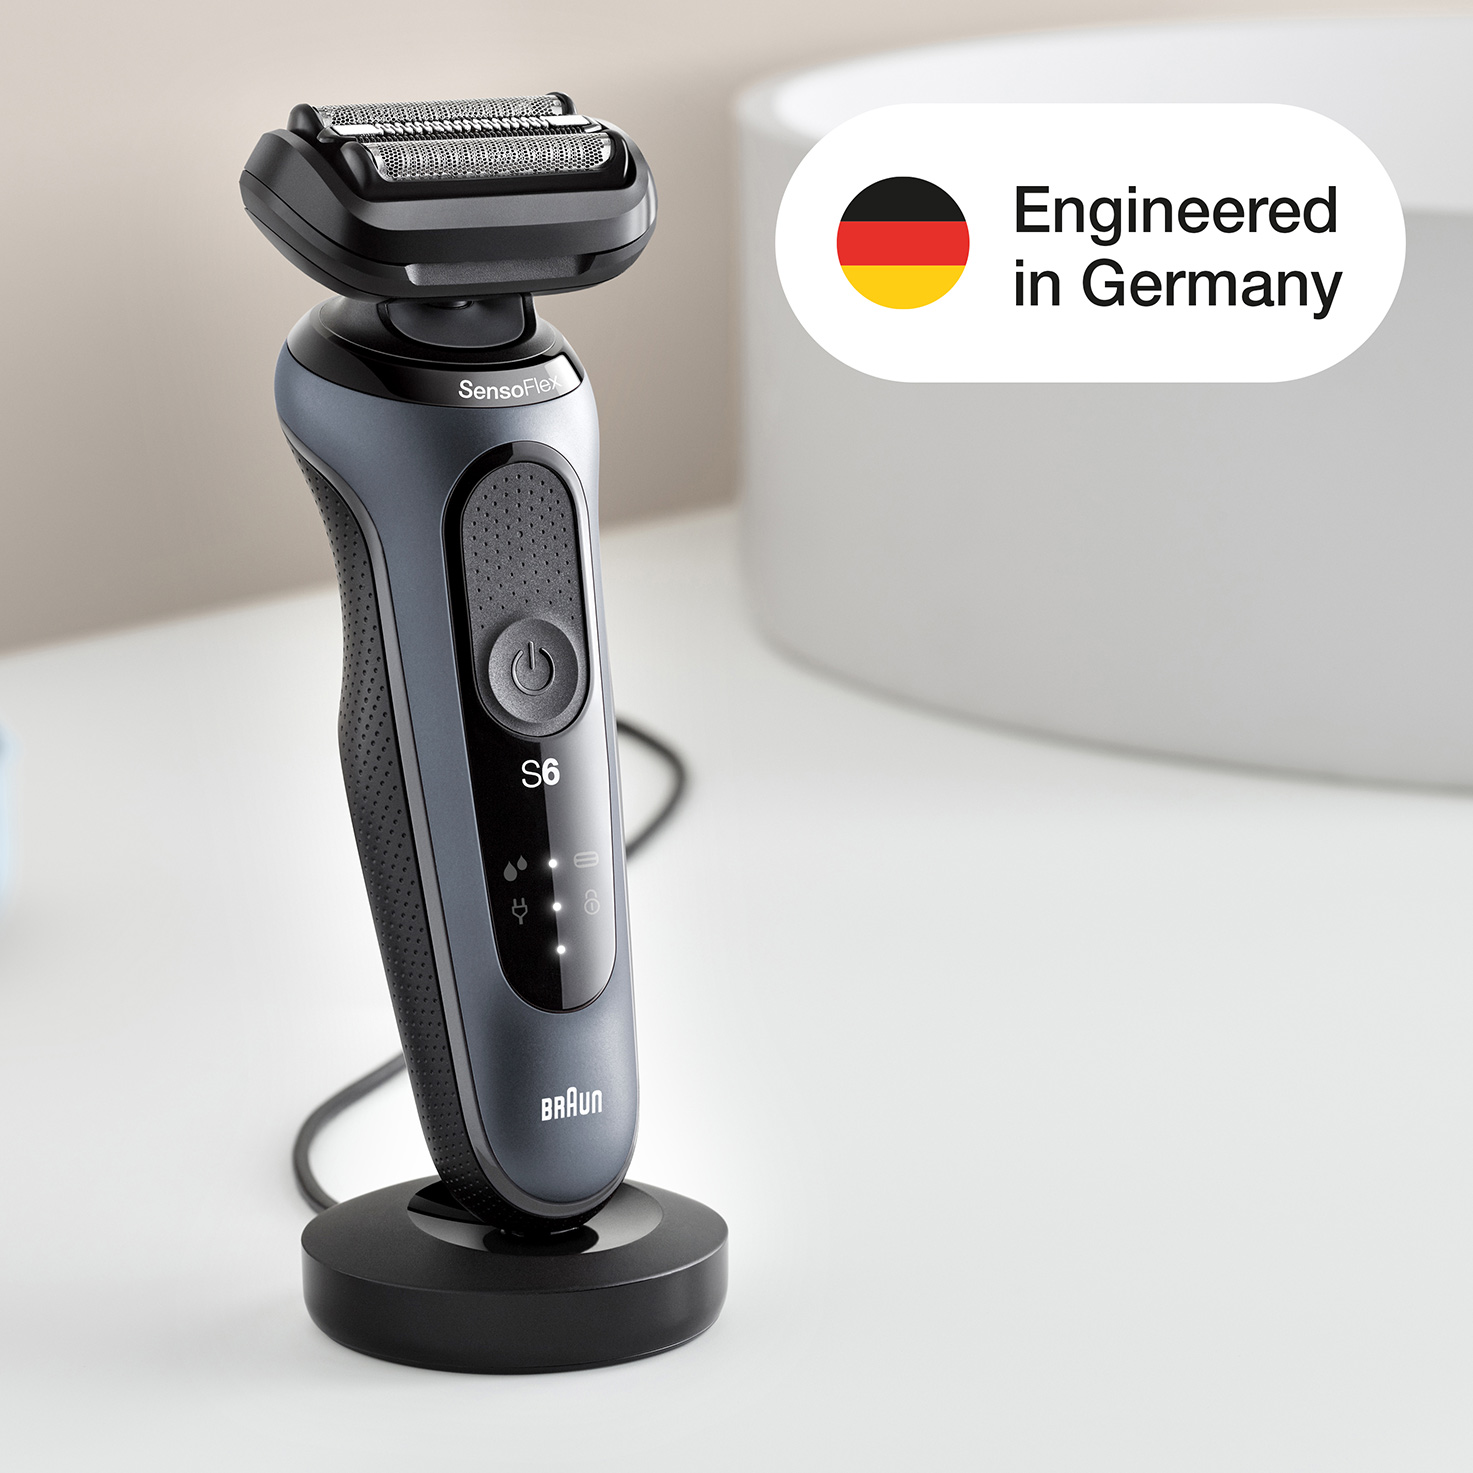 Series 6 61-N4500cs Wet & charging shaver attachment, and Dry Braun stand SG grey. 1 with 